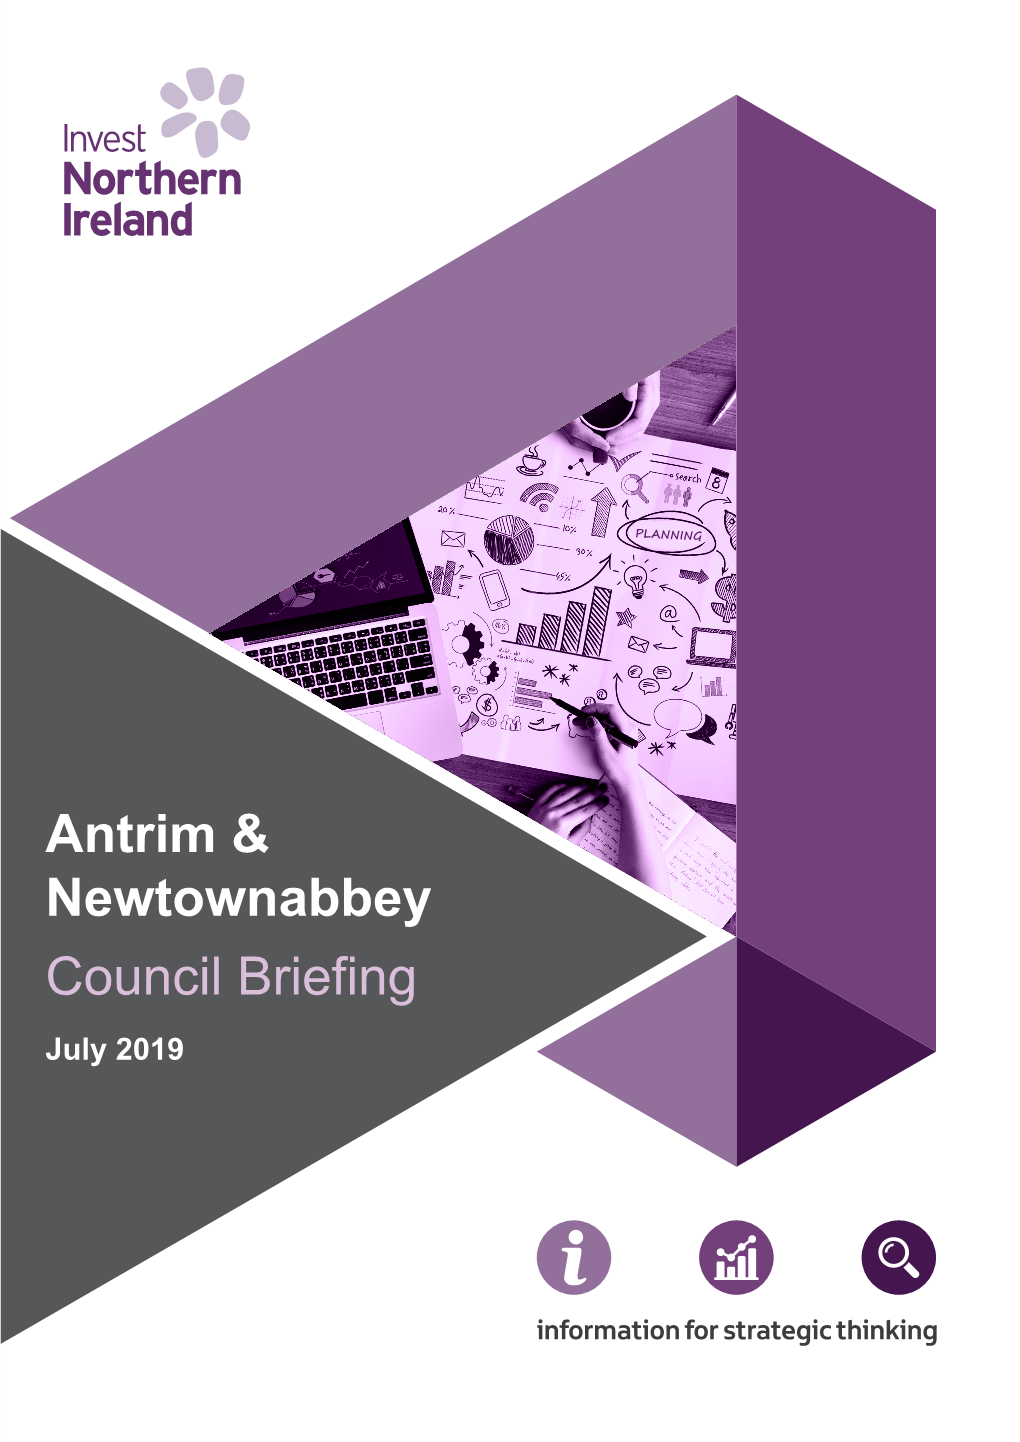 Antrim and Newtownabbey Council Briefing 2019